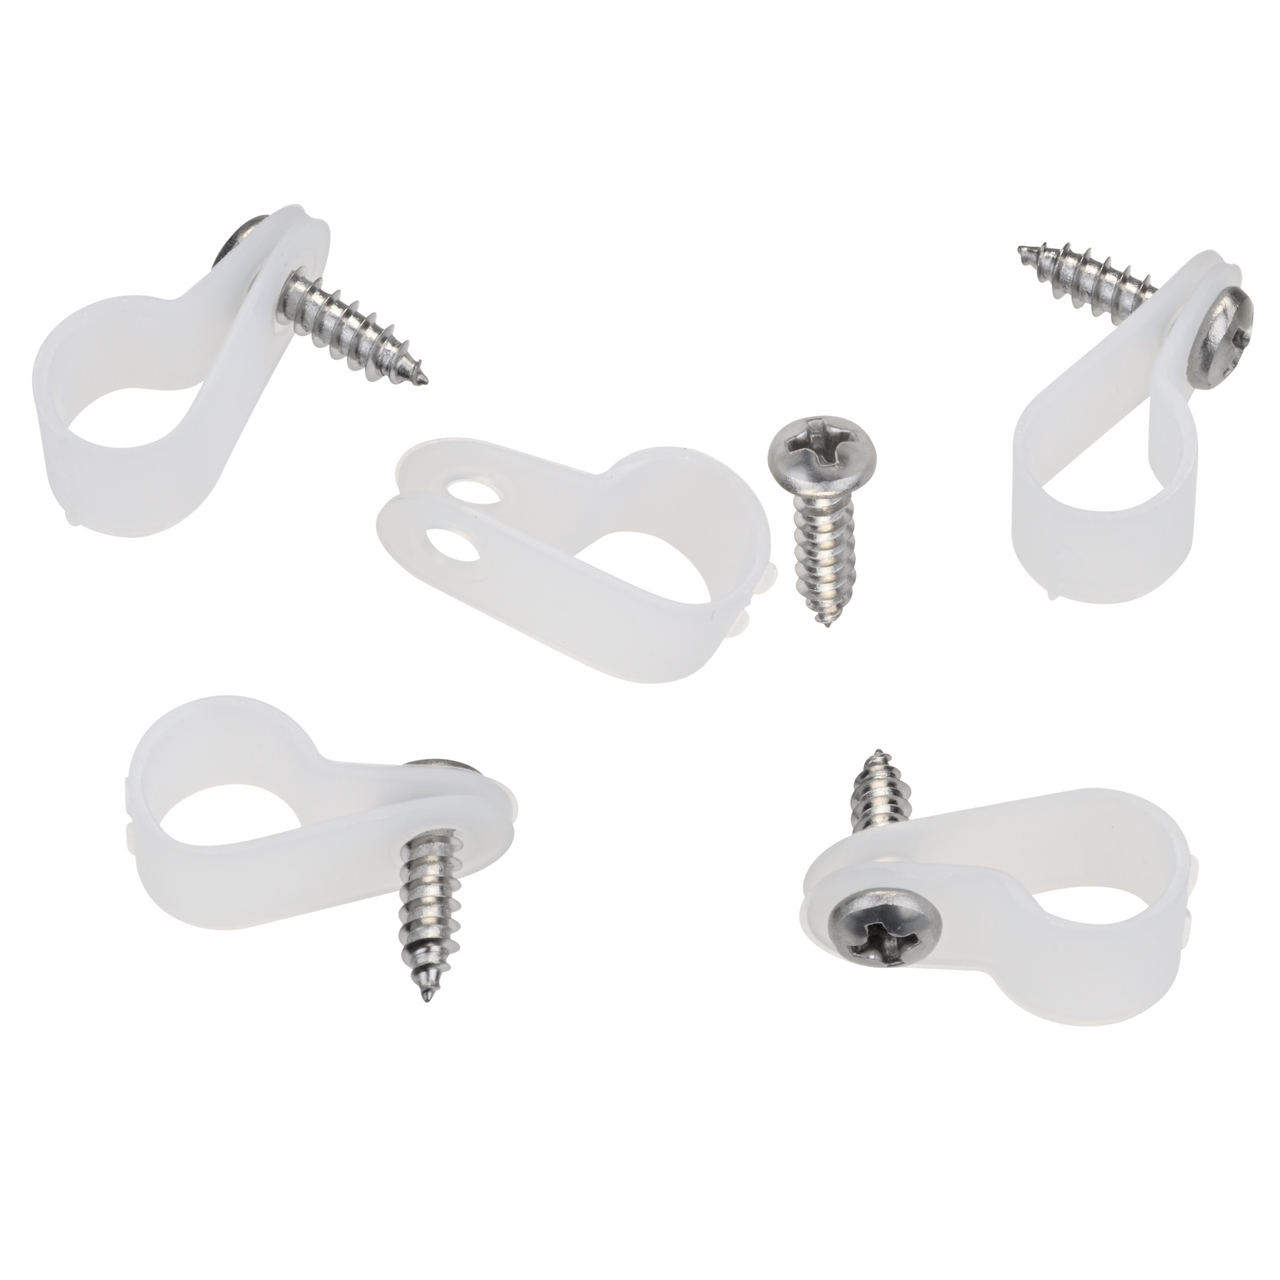 Low Voltage Limit Switch Cord Cable Clamps (5 Piece Kit)